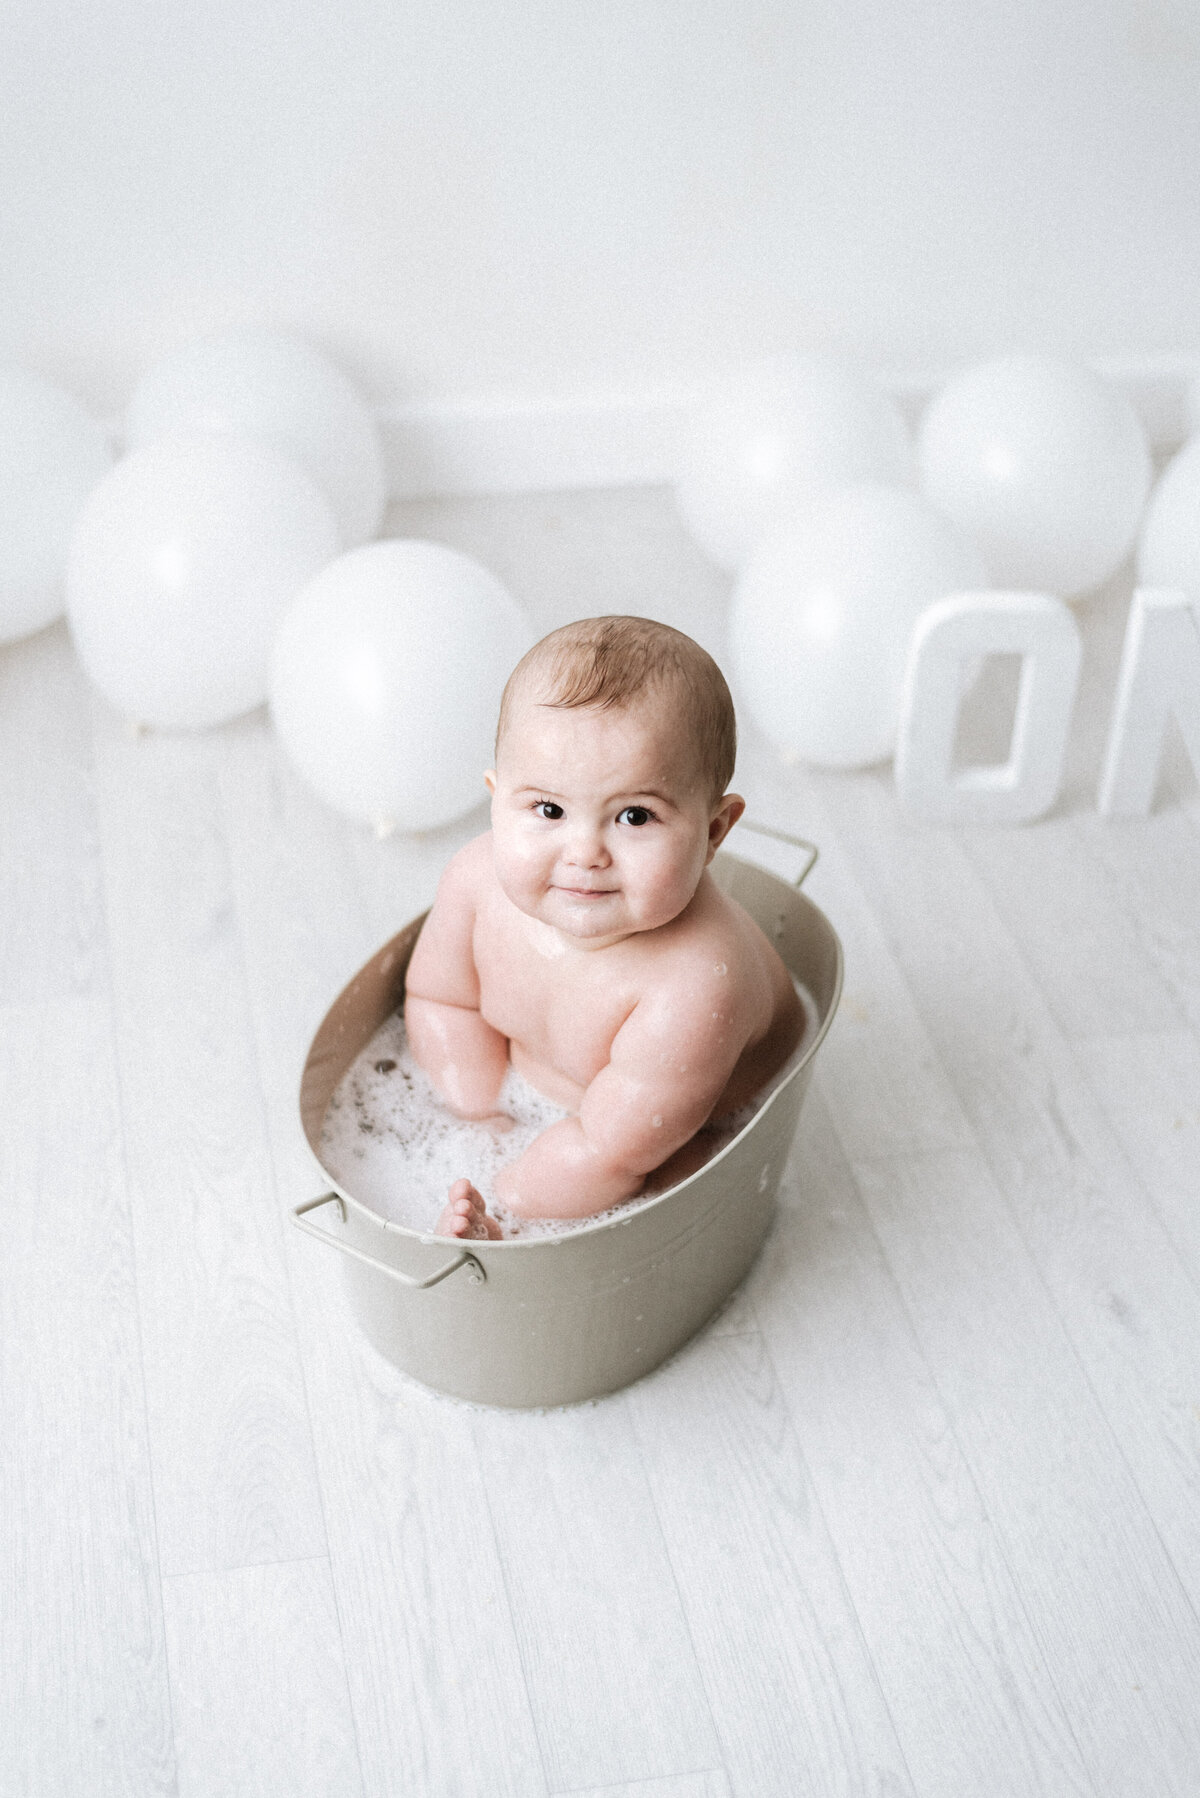 Baby boy smiling in a bath tub at west sussex cake smash photoshoot